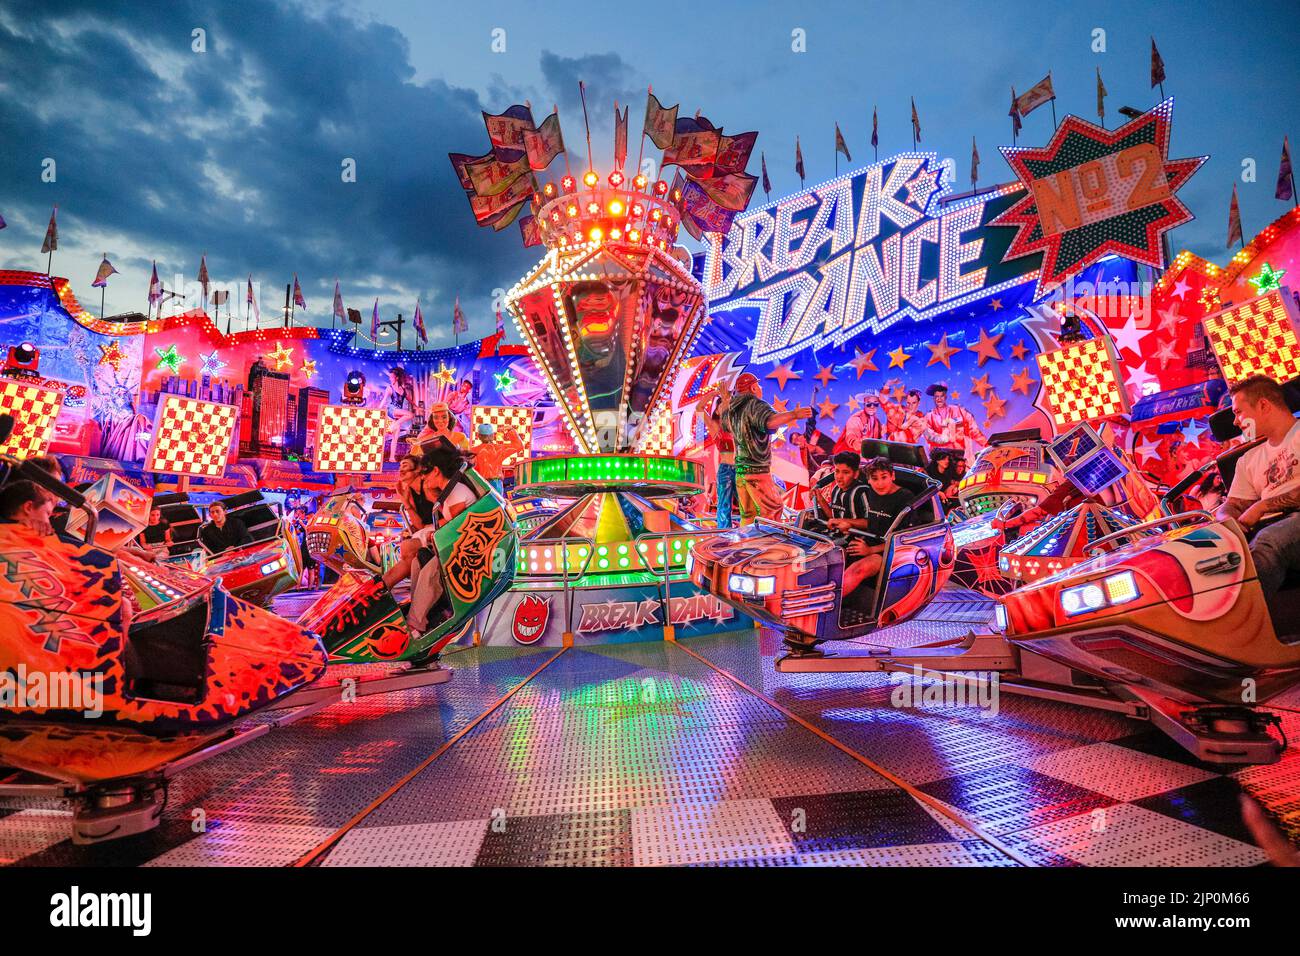 Herne, NRW, Germany. 14th Aug, 2022. The Break Dance ride proves popular.Cranger Kirmes, Germany's 3rd largest funfair with a tradition dating back to the middle ages, has returned to pre-pandemic visitor numbers with more than 3.9m attending in hot, sunny weather, enjoying the rides, rollercoasters, beer halls, food and drink. The funfair concluded tonight with fireworks over the nearby Rhine-Herne Canal. Credit: Imageplotter/Alamy Live News Stock Photo